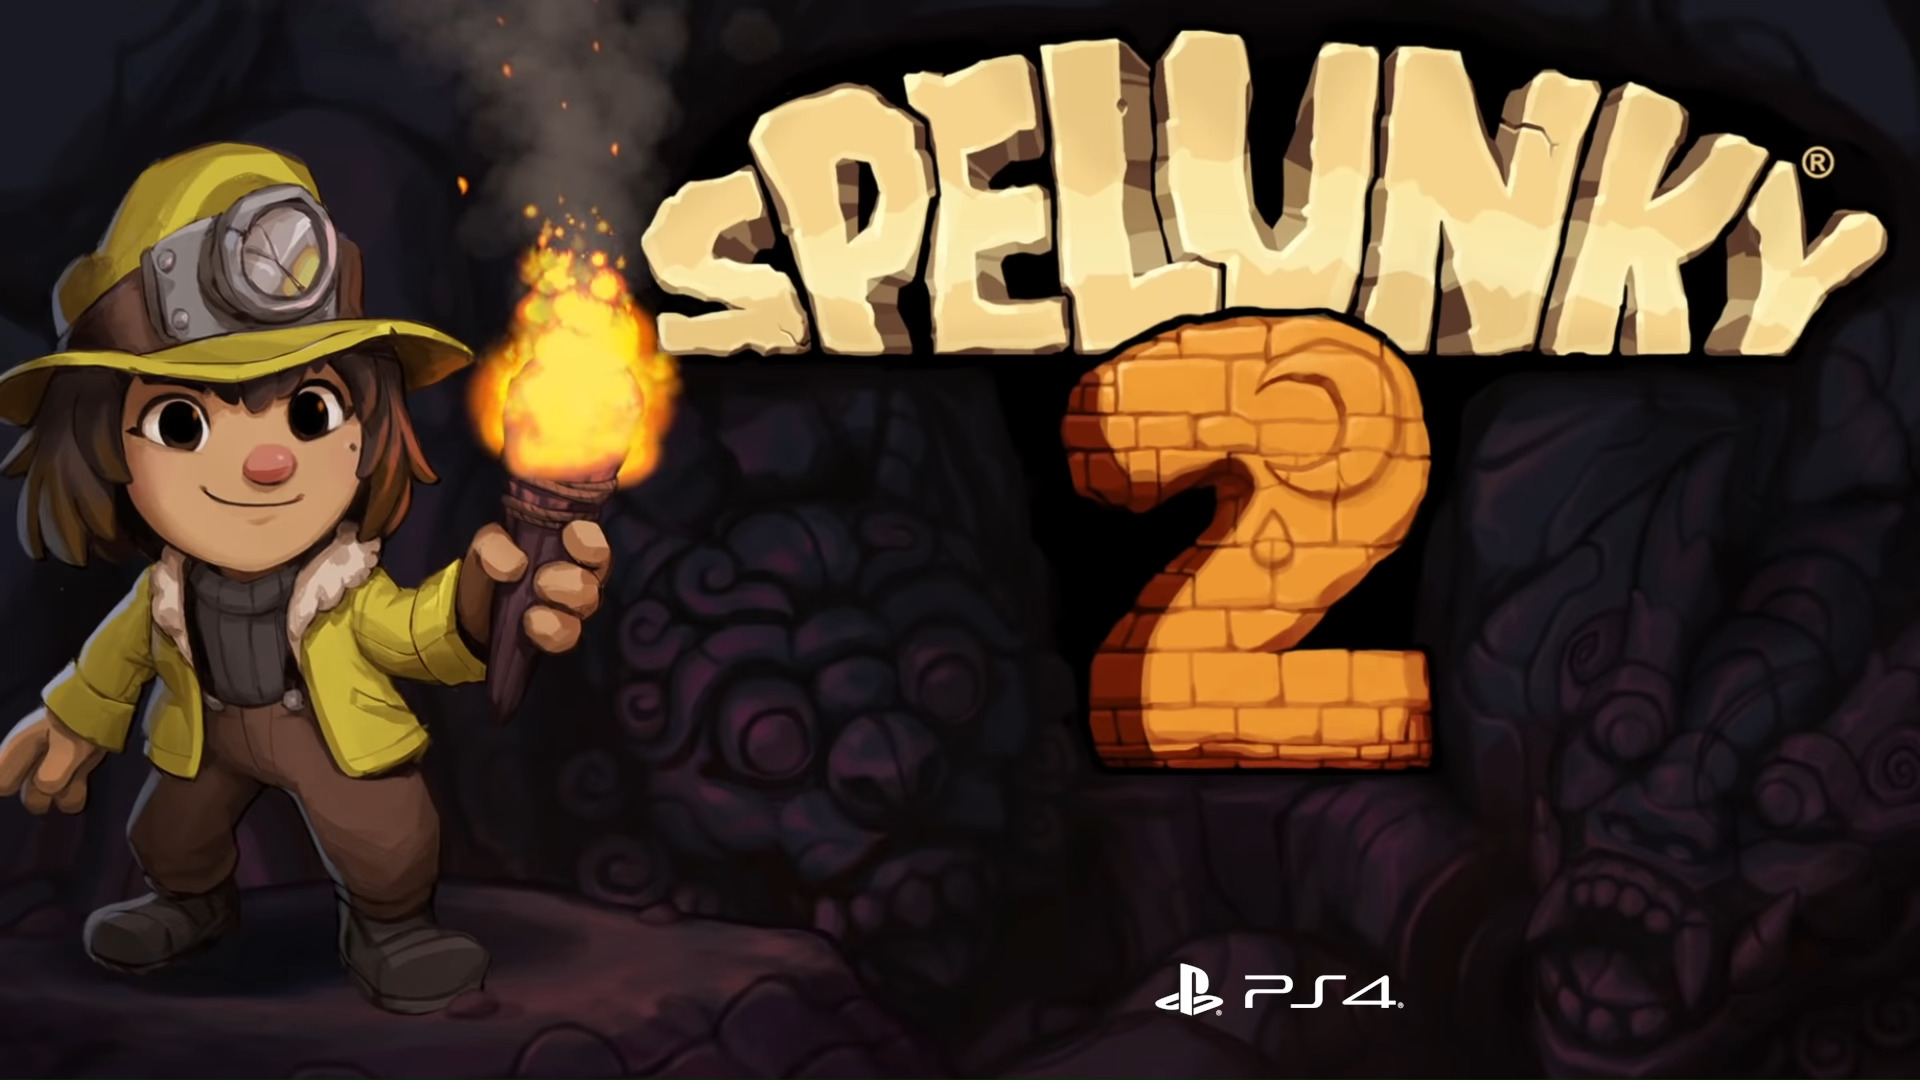 Spelunky 2, The Sequel To The Highly Acclaimed Roguelike Platforming Game, Is Out Today On PS4